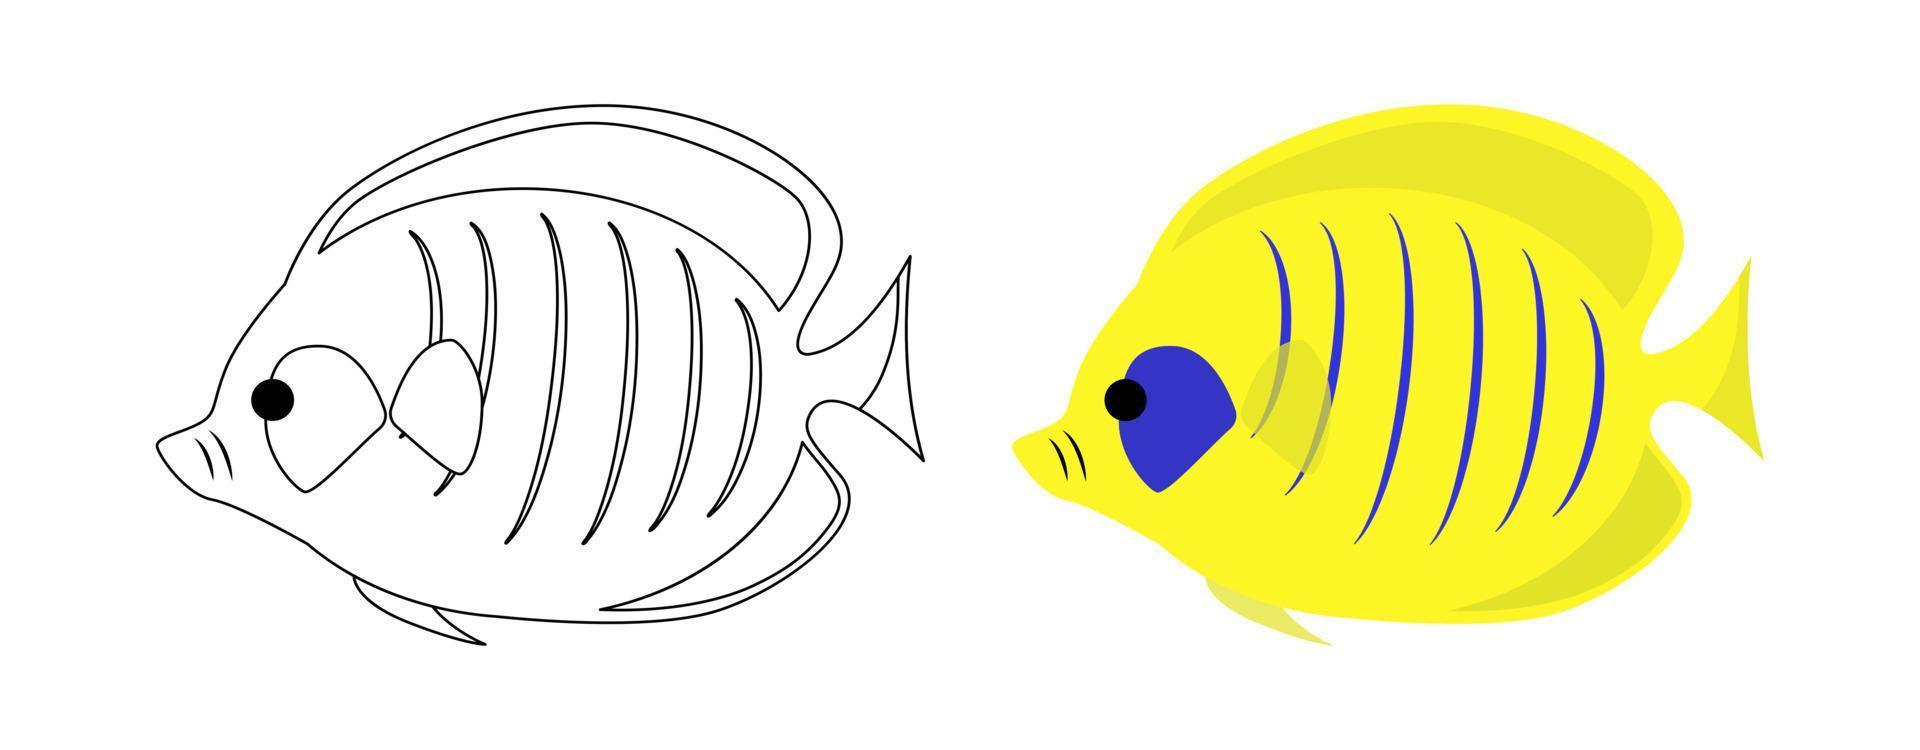 Yellow Tropical Fish Vector Illustration. Cartoon vector outline and flat style